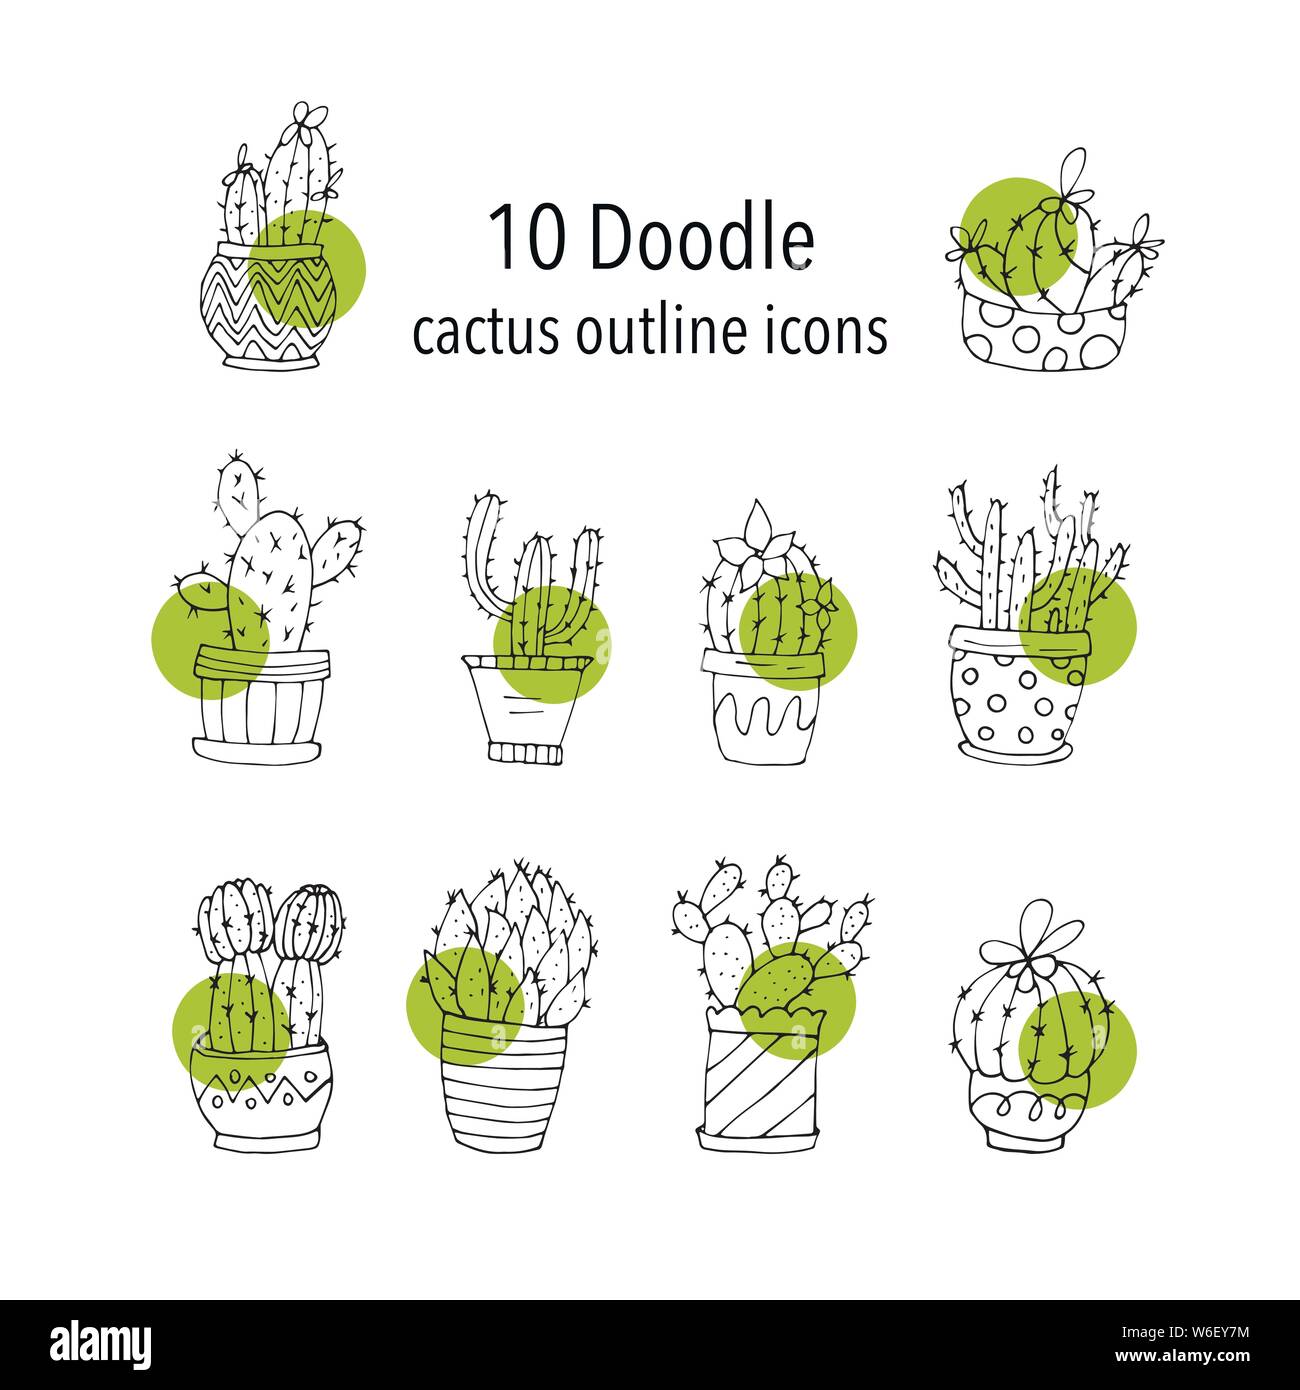 Set of 10 handdrawn doodle icons of cactus vases. Cactus succulents ...